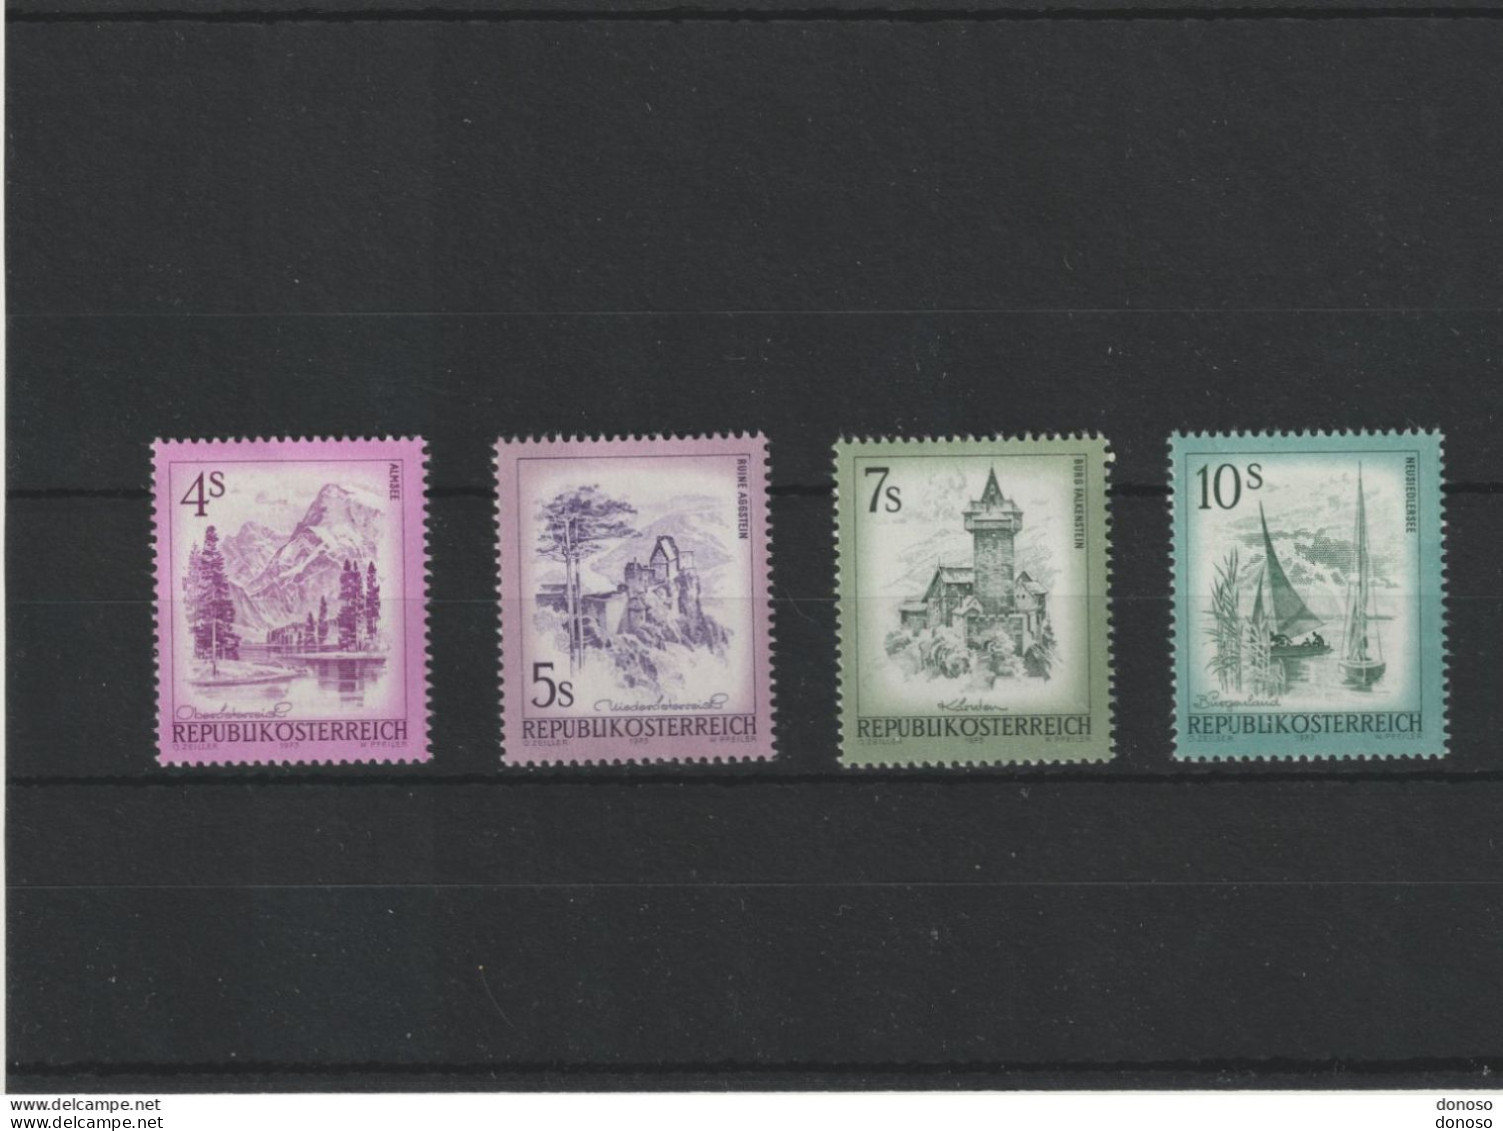 AUTRICHE 1973 Série Courante, Paysages Yvert 1259-1261 NEUF** MNH Cote : 9 Euros - Unused Stamps